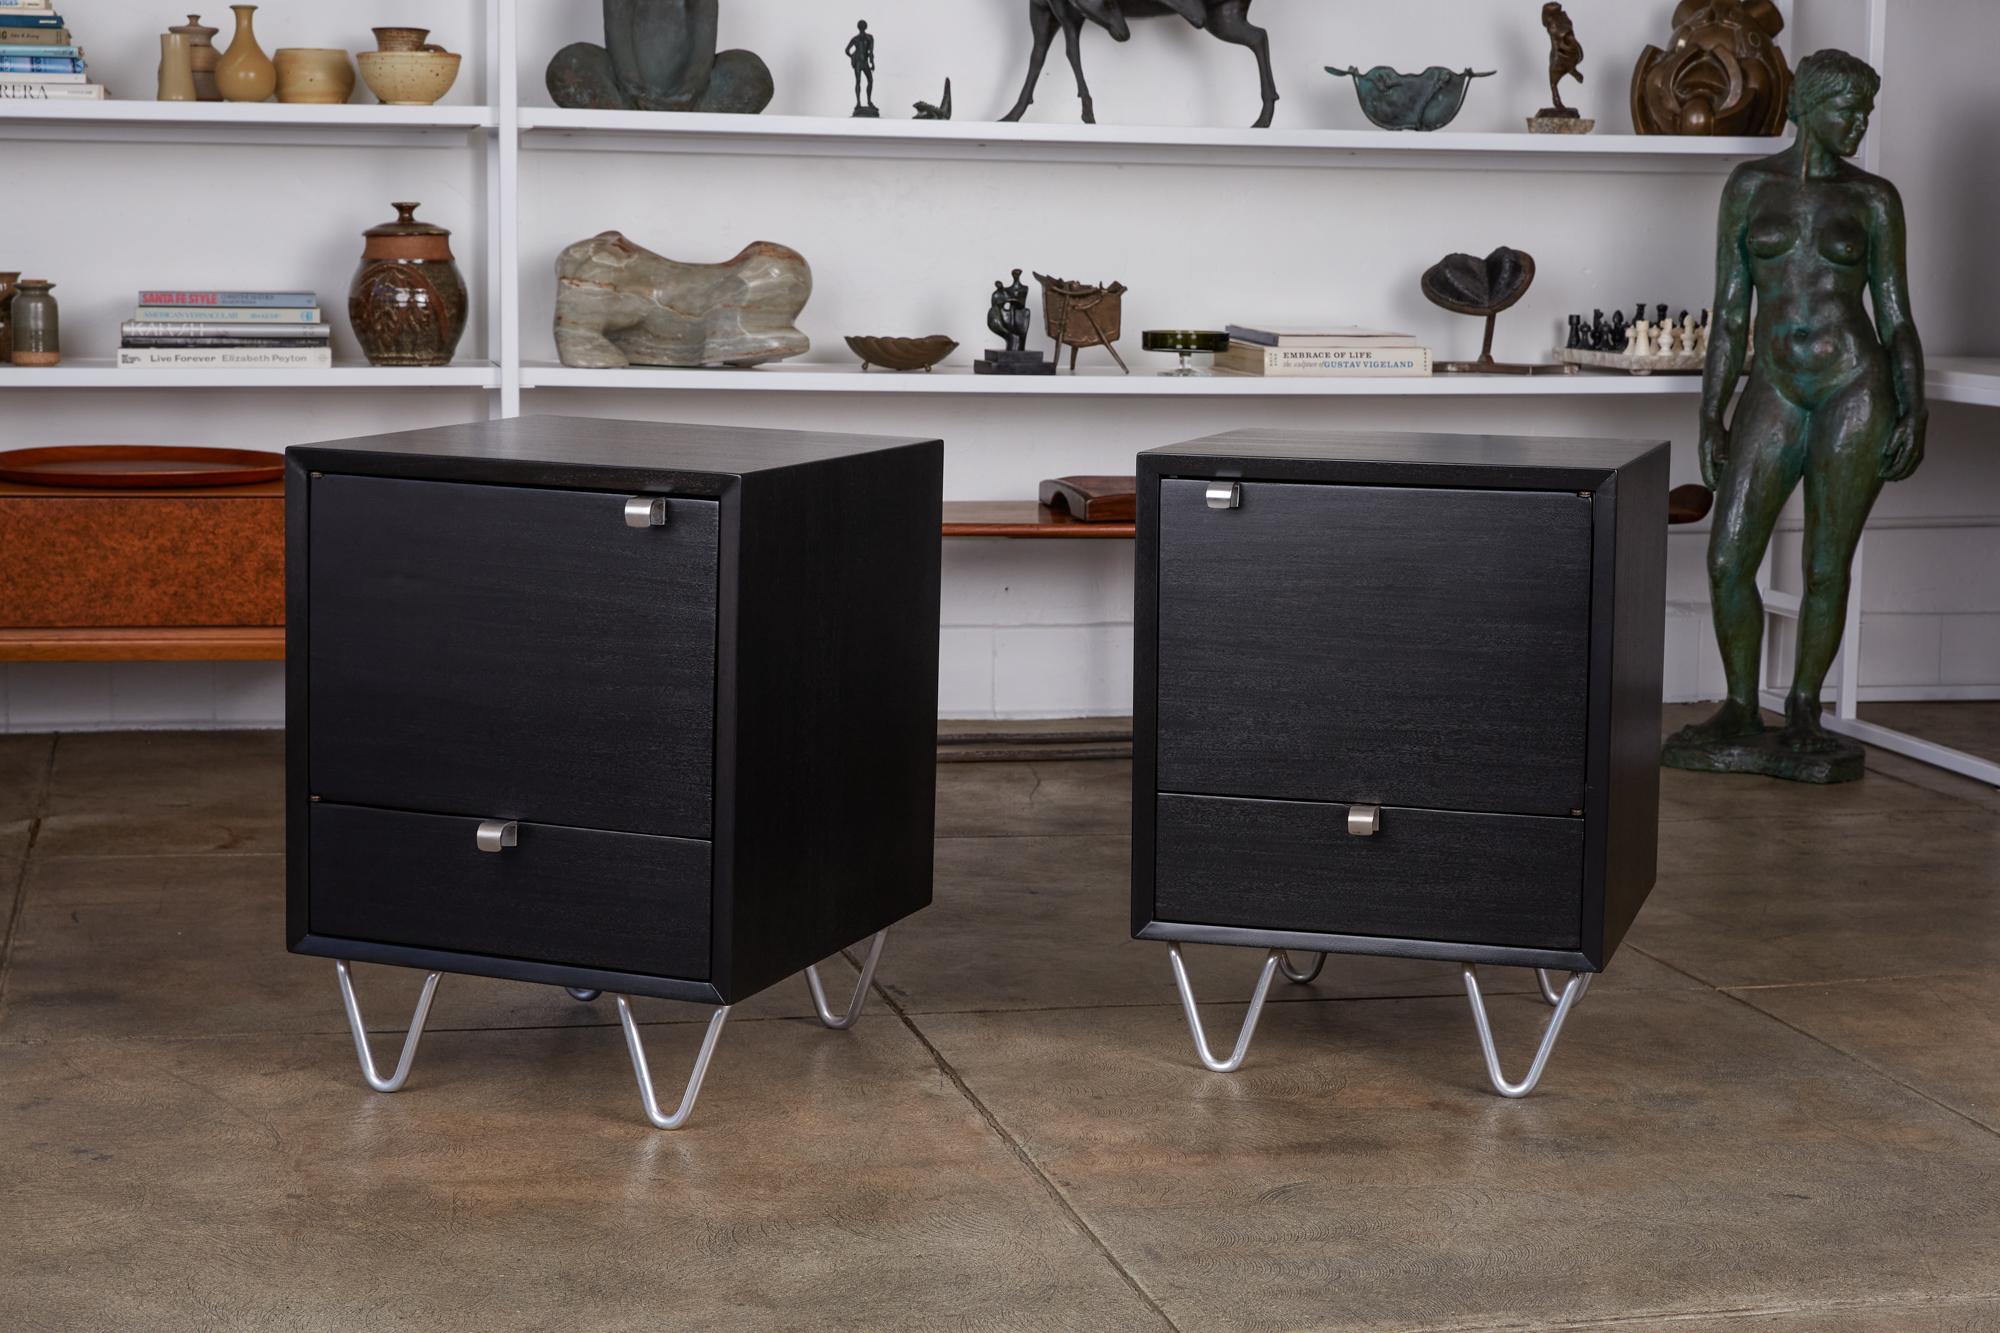 Pair of rare by George Nelson for Herman Miller Model 4617 nightstands, circa early 1950s. These Art Deco inspired pieces were part of Herman Miller’s Basic Cabinet Series. They feature short aluminum hairpin legs and curved aluminum pulls on an